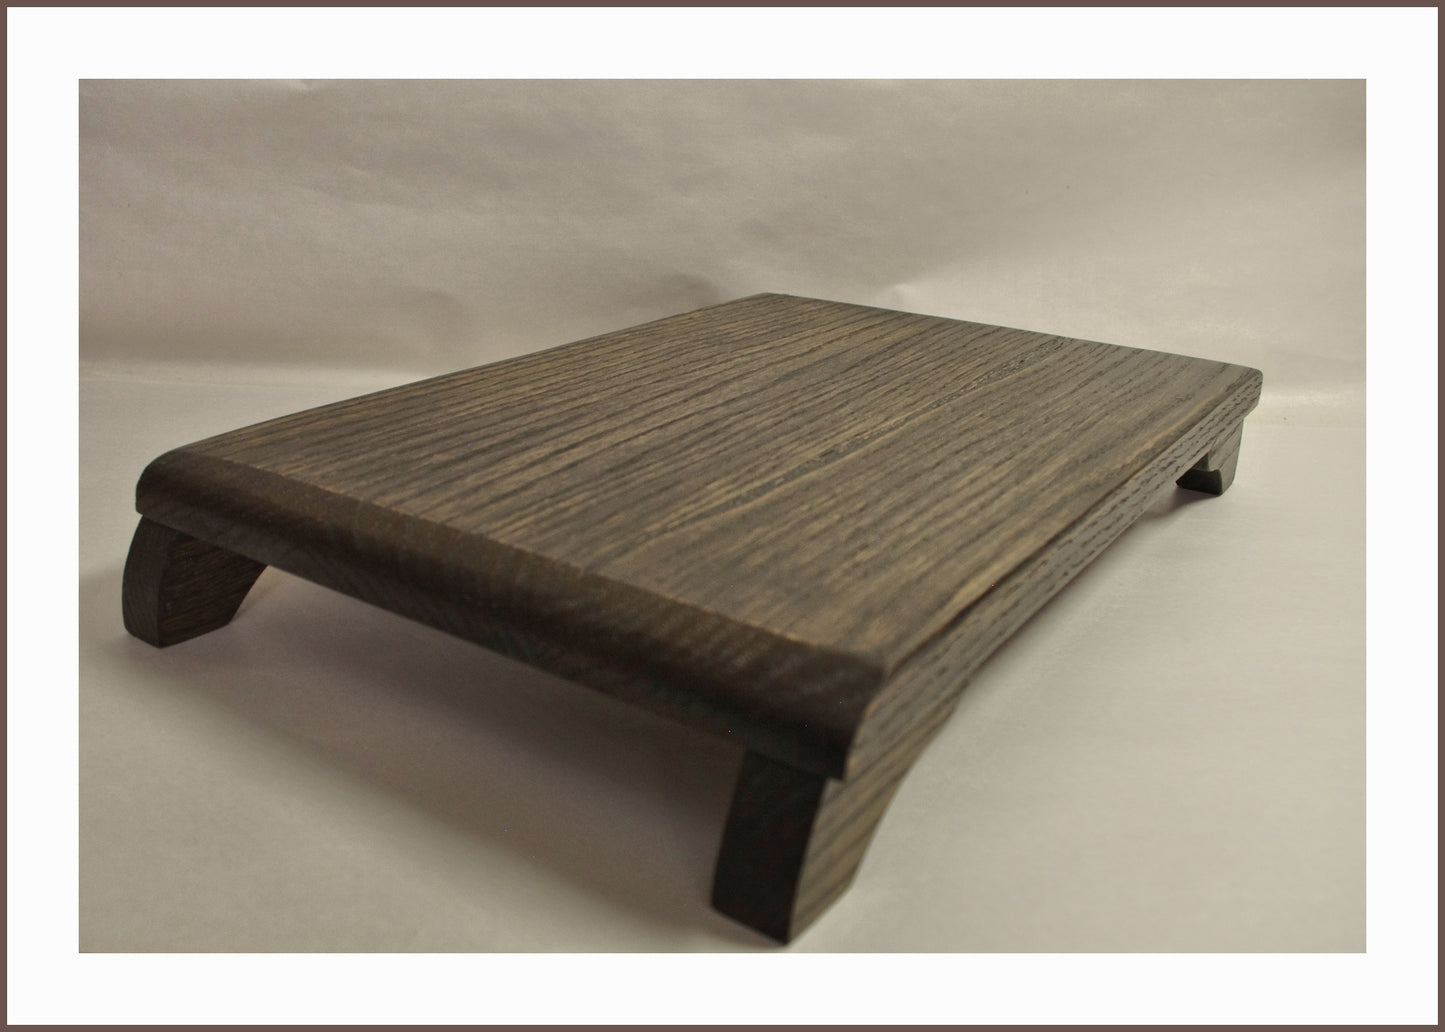 NEW IN STOCK - C2964-2023 Curved Leg Bonsai Stand oak with Antique Walnut Finish 16L-9.875W-2.25H